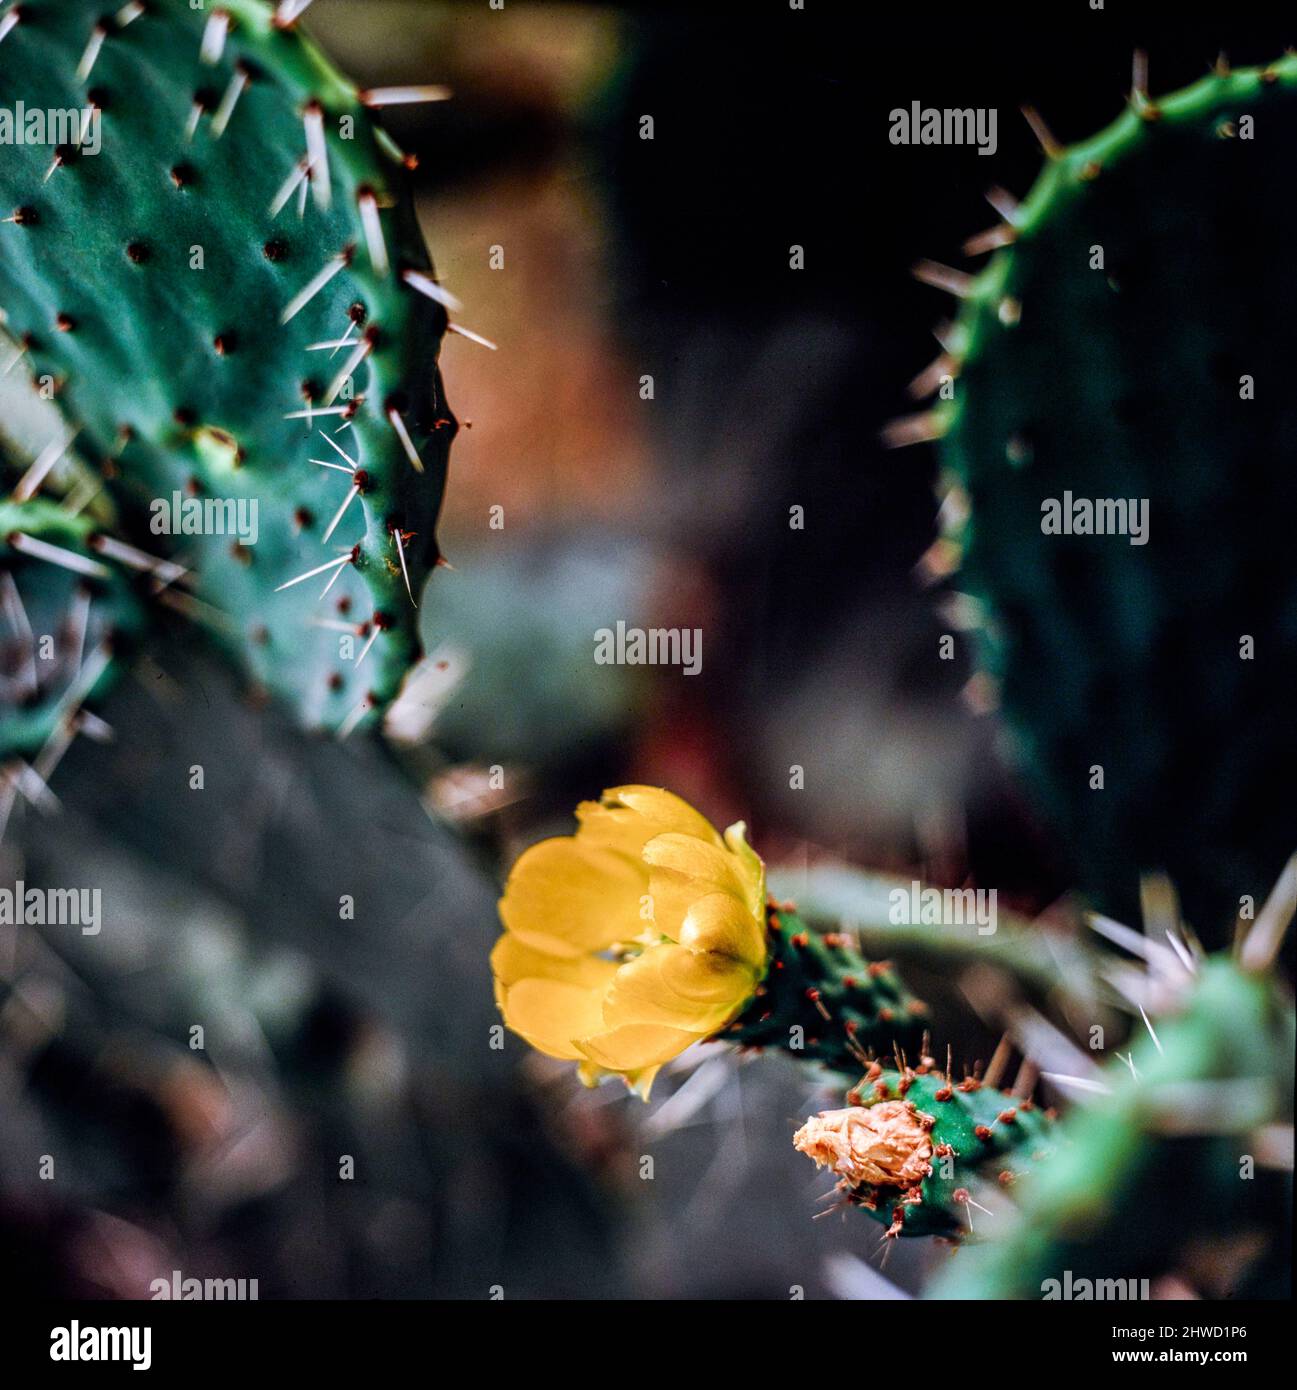 Prickly Pear paddle and flower in close up, natural plant portrait Stock Photo